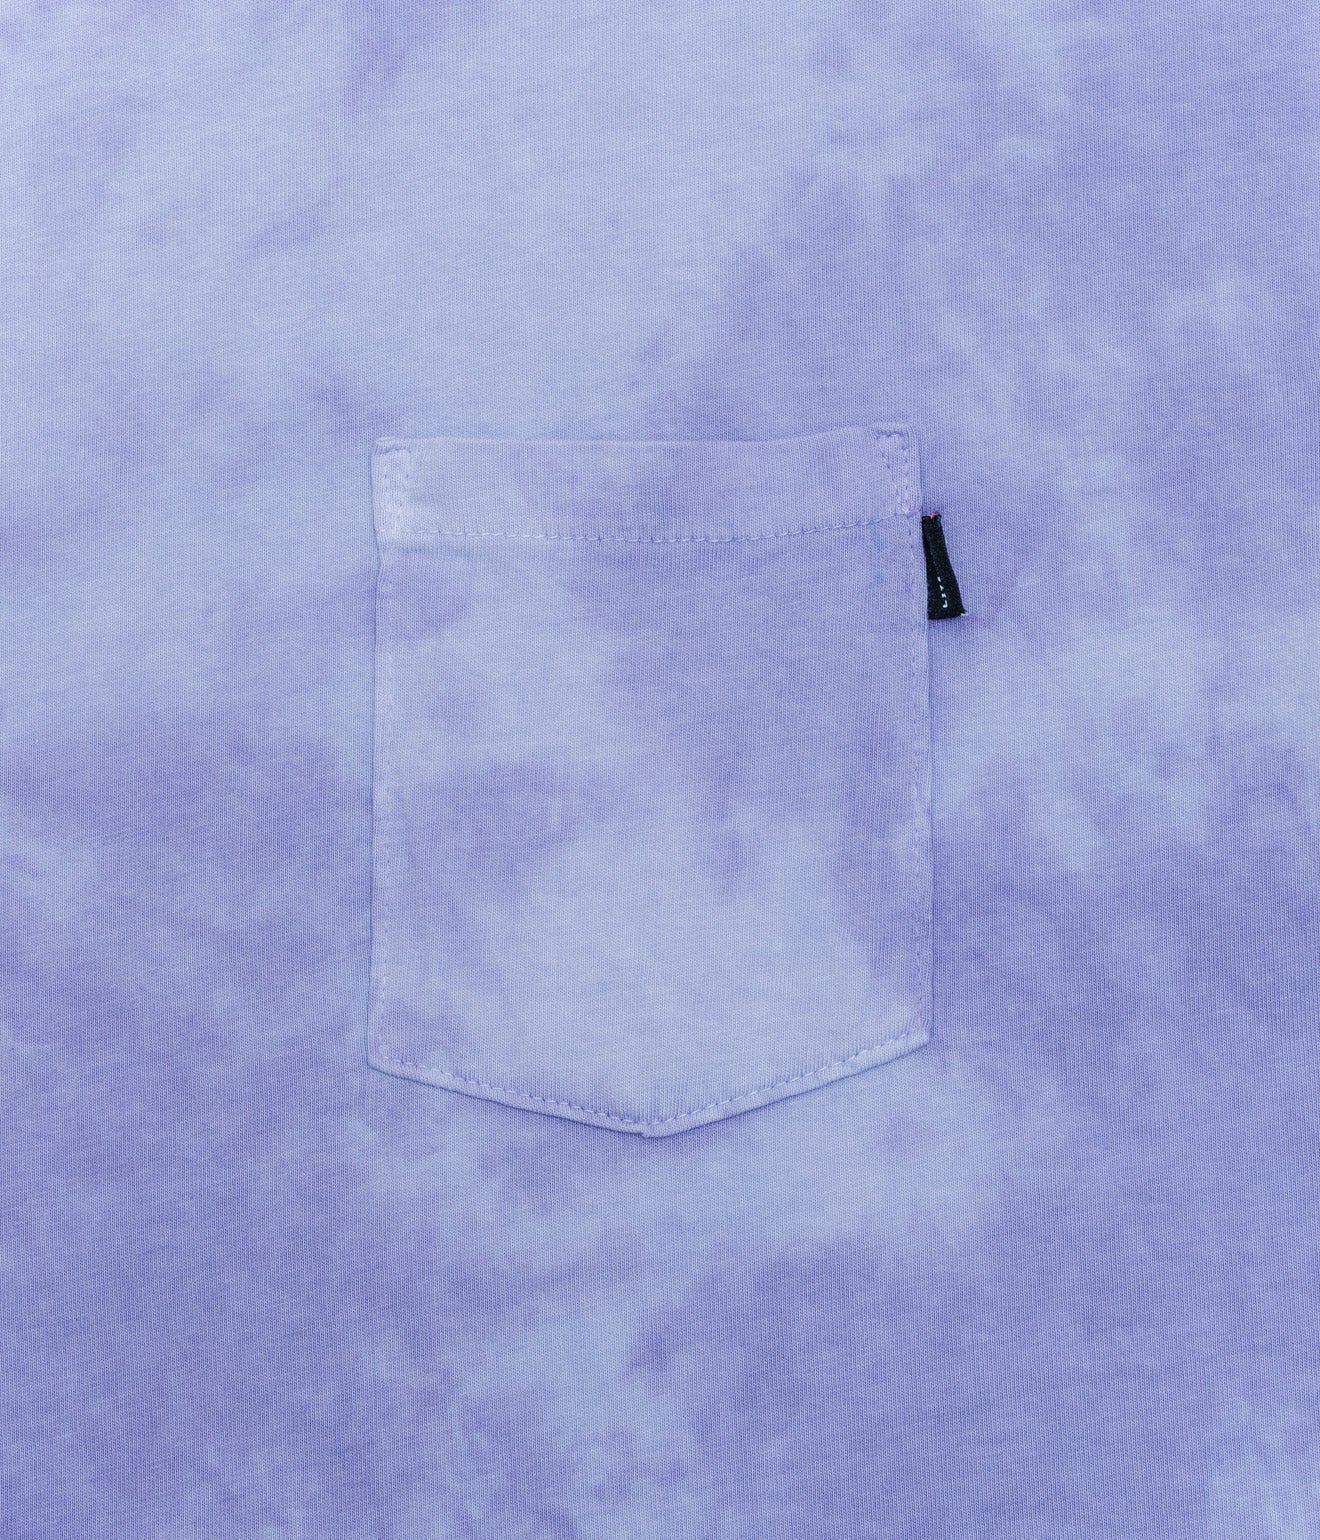 LITE YEAR "Short Sleeve Pocket Tee" Cloudy Washed Lavender - WEAREALLANIMALS